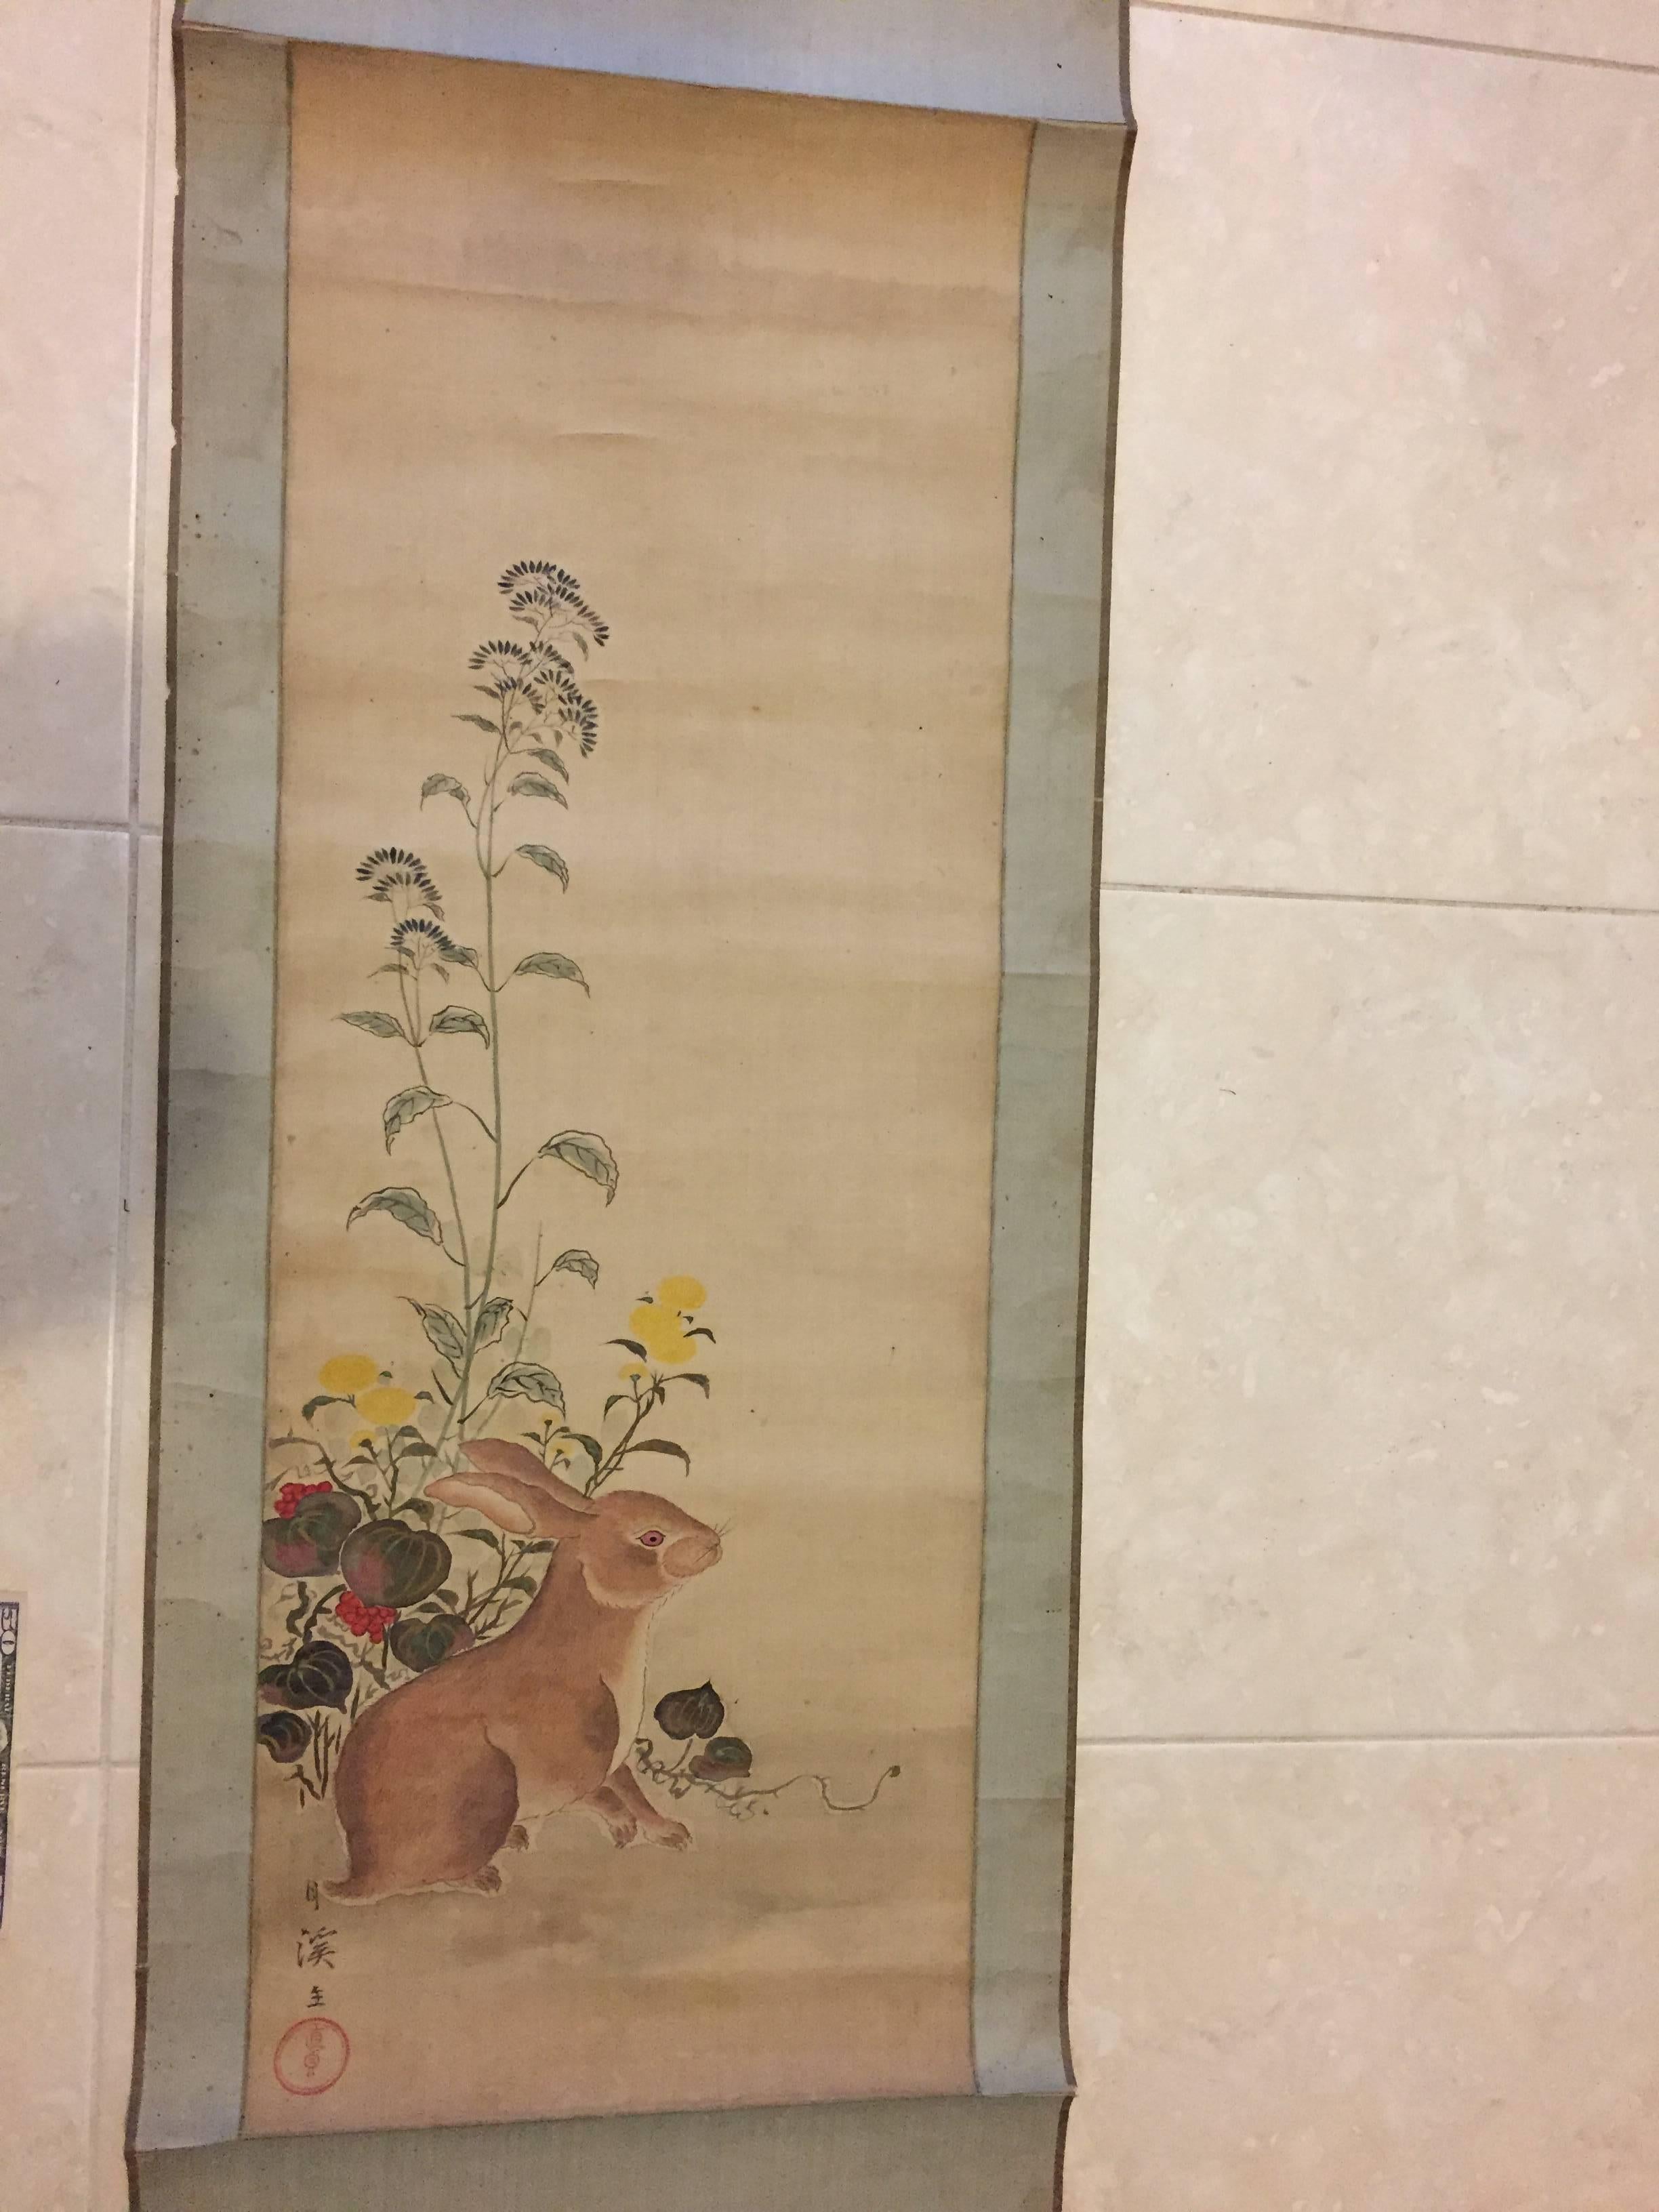 Japan, a scarce hand painting on paper scroll of a "Rabbit in Flowers" signed , old black rollers, Taisho/Showa period, (1912-1930s).

 Dimensions: 21 inches wide and 62 inches length.

Hard to find subject matter, this painting is